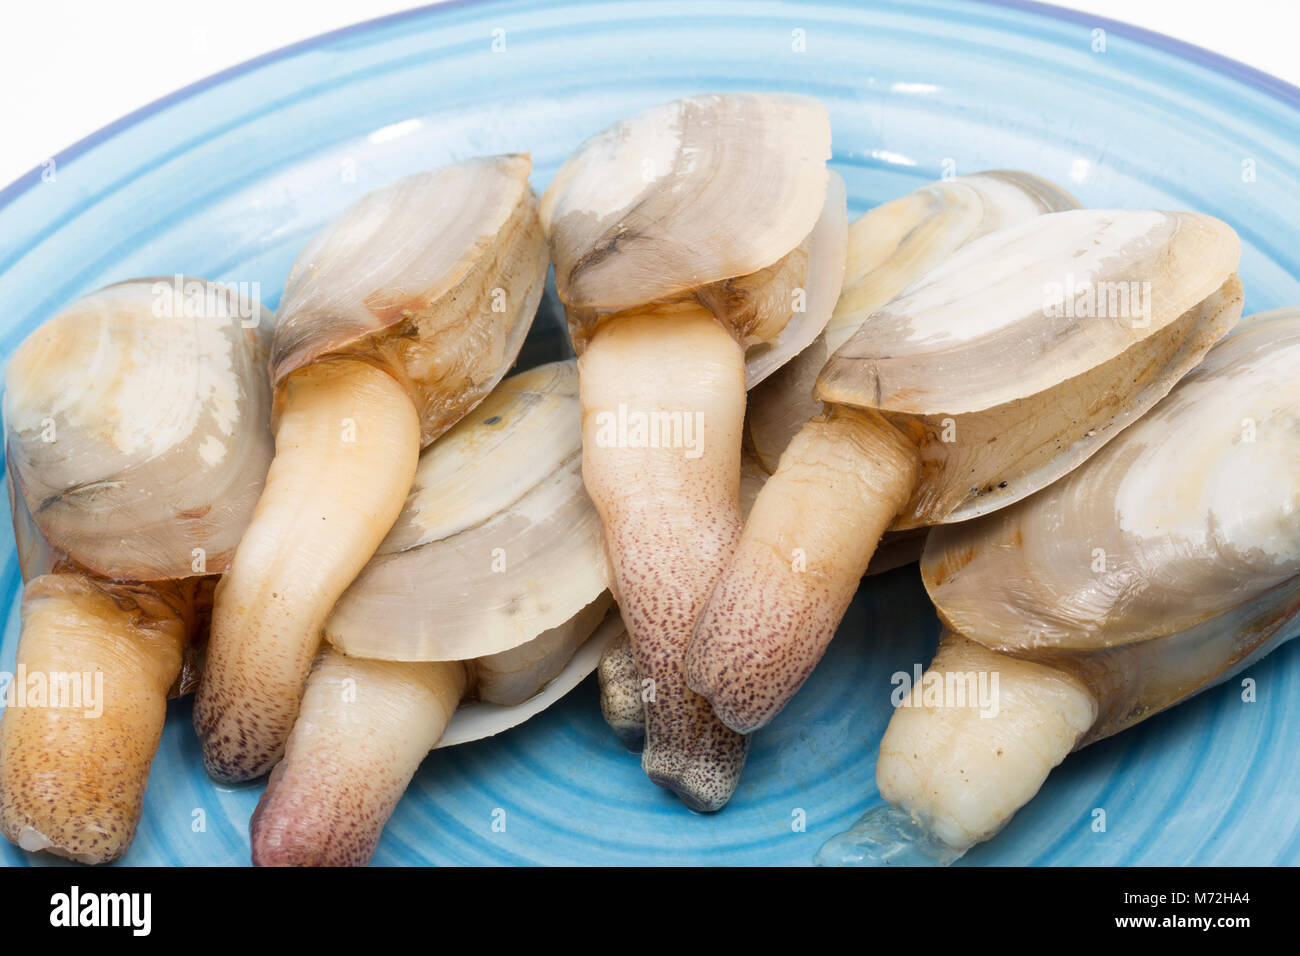 Common otter clams-Lutraria lutraria- washed up at Studland ,Dorset following Storm Emma and freezing conditions, showing their siphons Stock Photo